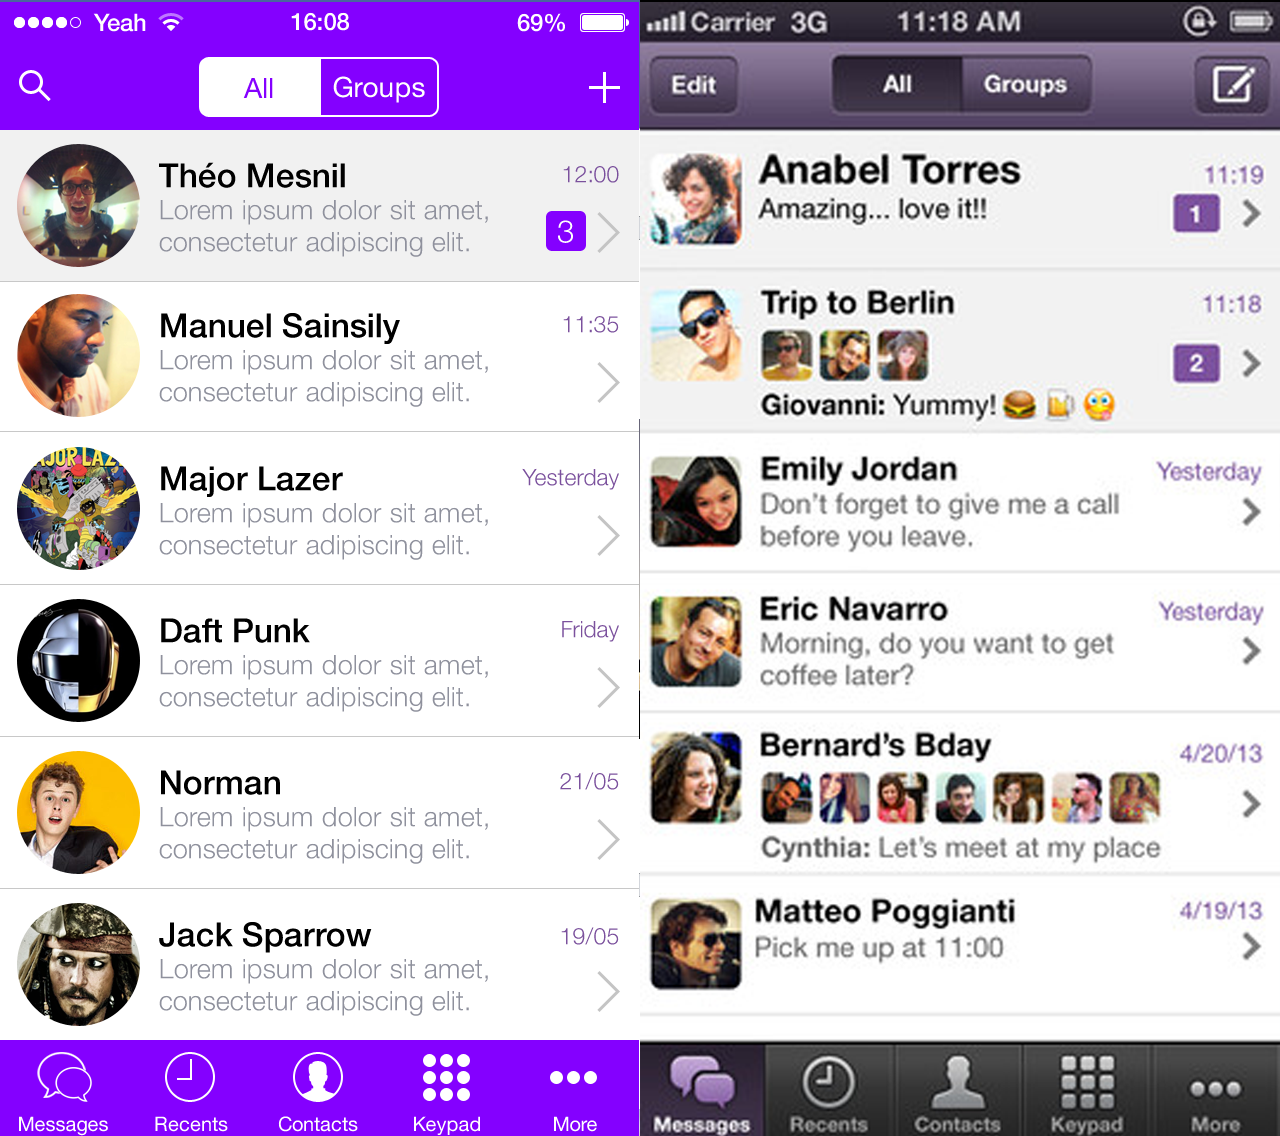 download viber for iphone 4